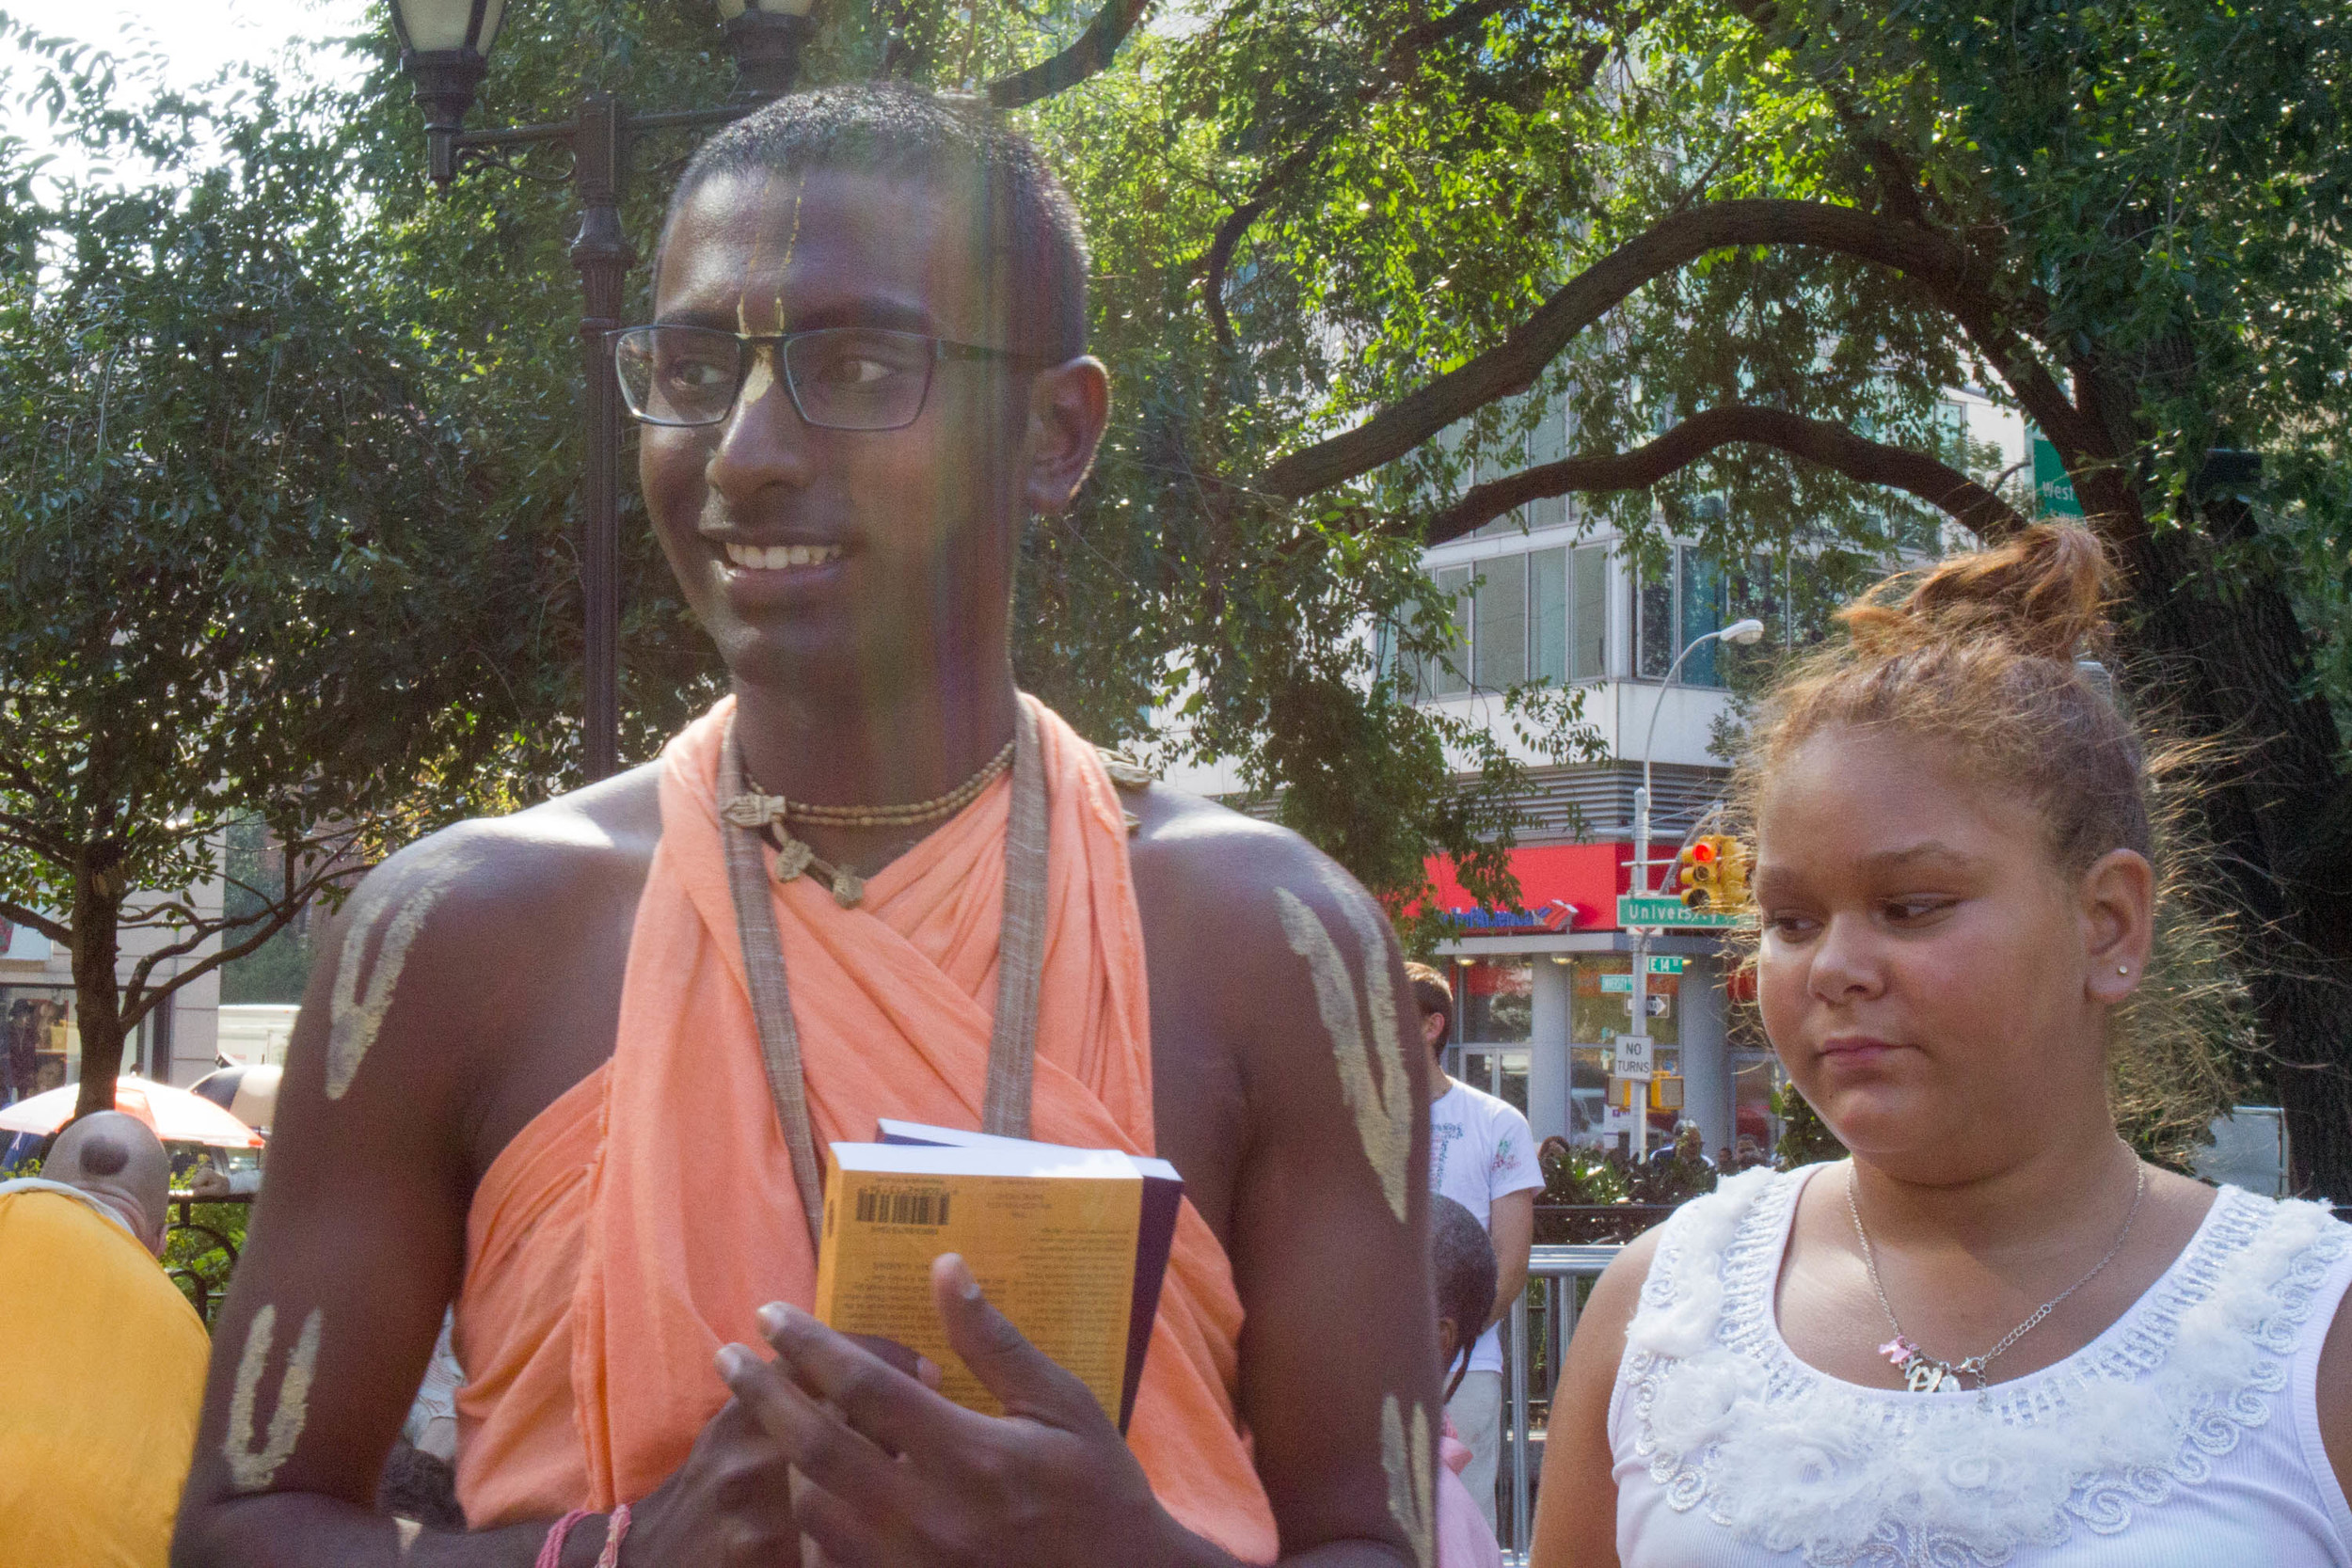  Nihal clasps the Bhagavad Gita, which he tries to distribute to passers-by in exchange for a small donation 